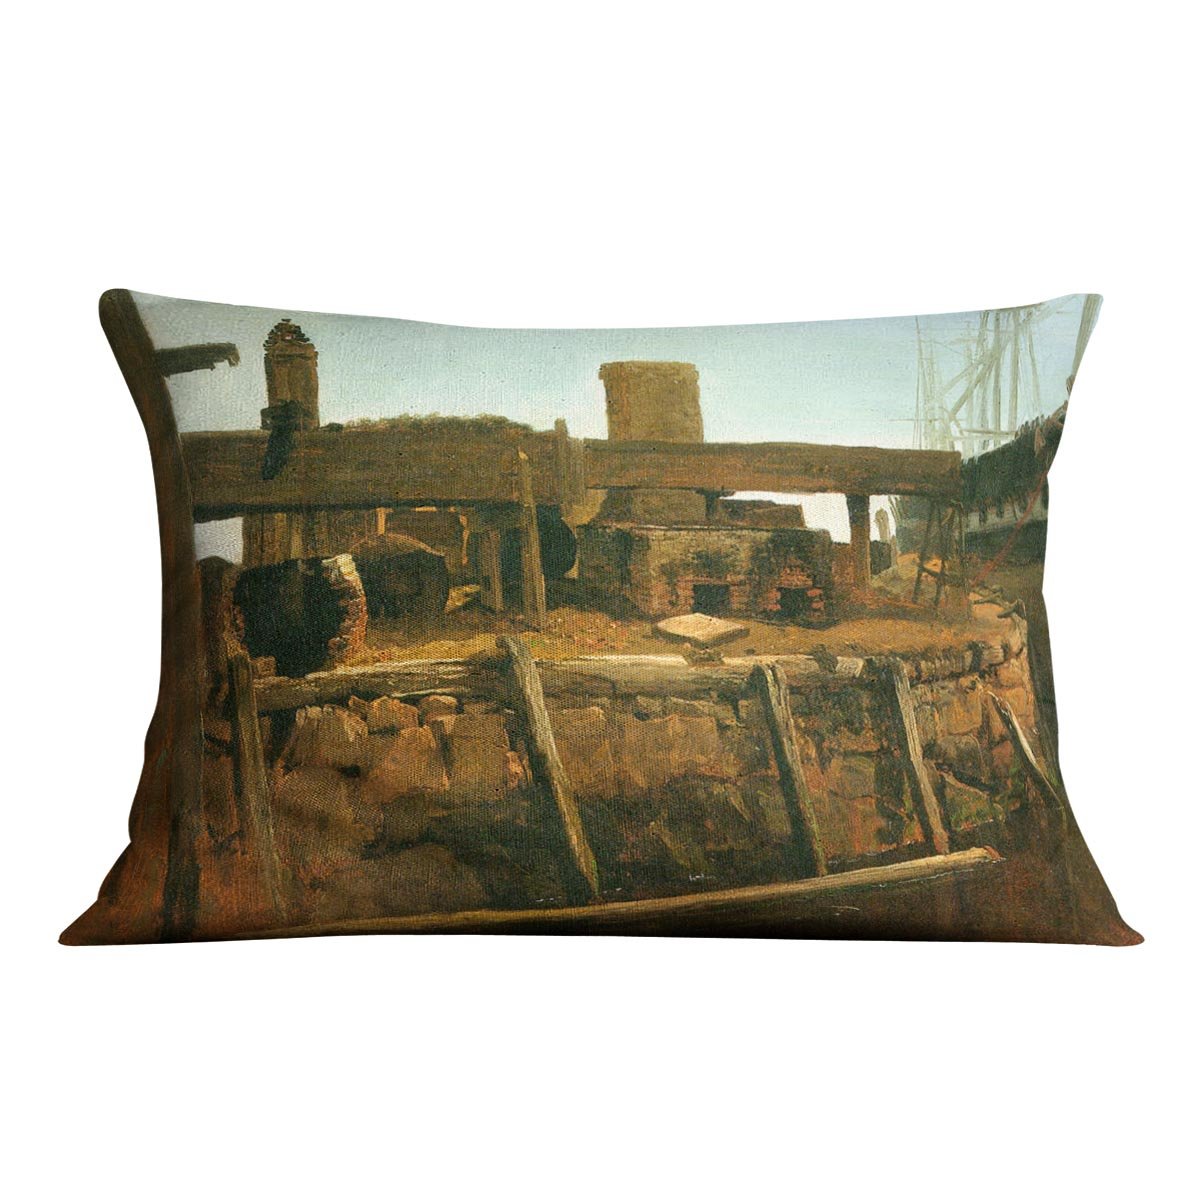 Boat at the dock by Bierstadt Cushion - Canvas Art Rocks - 4